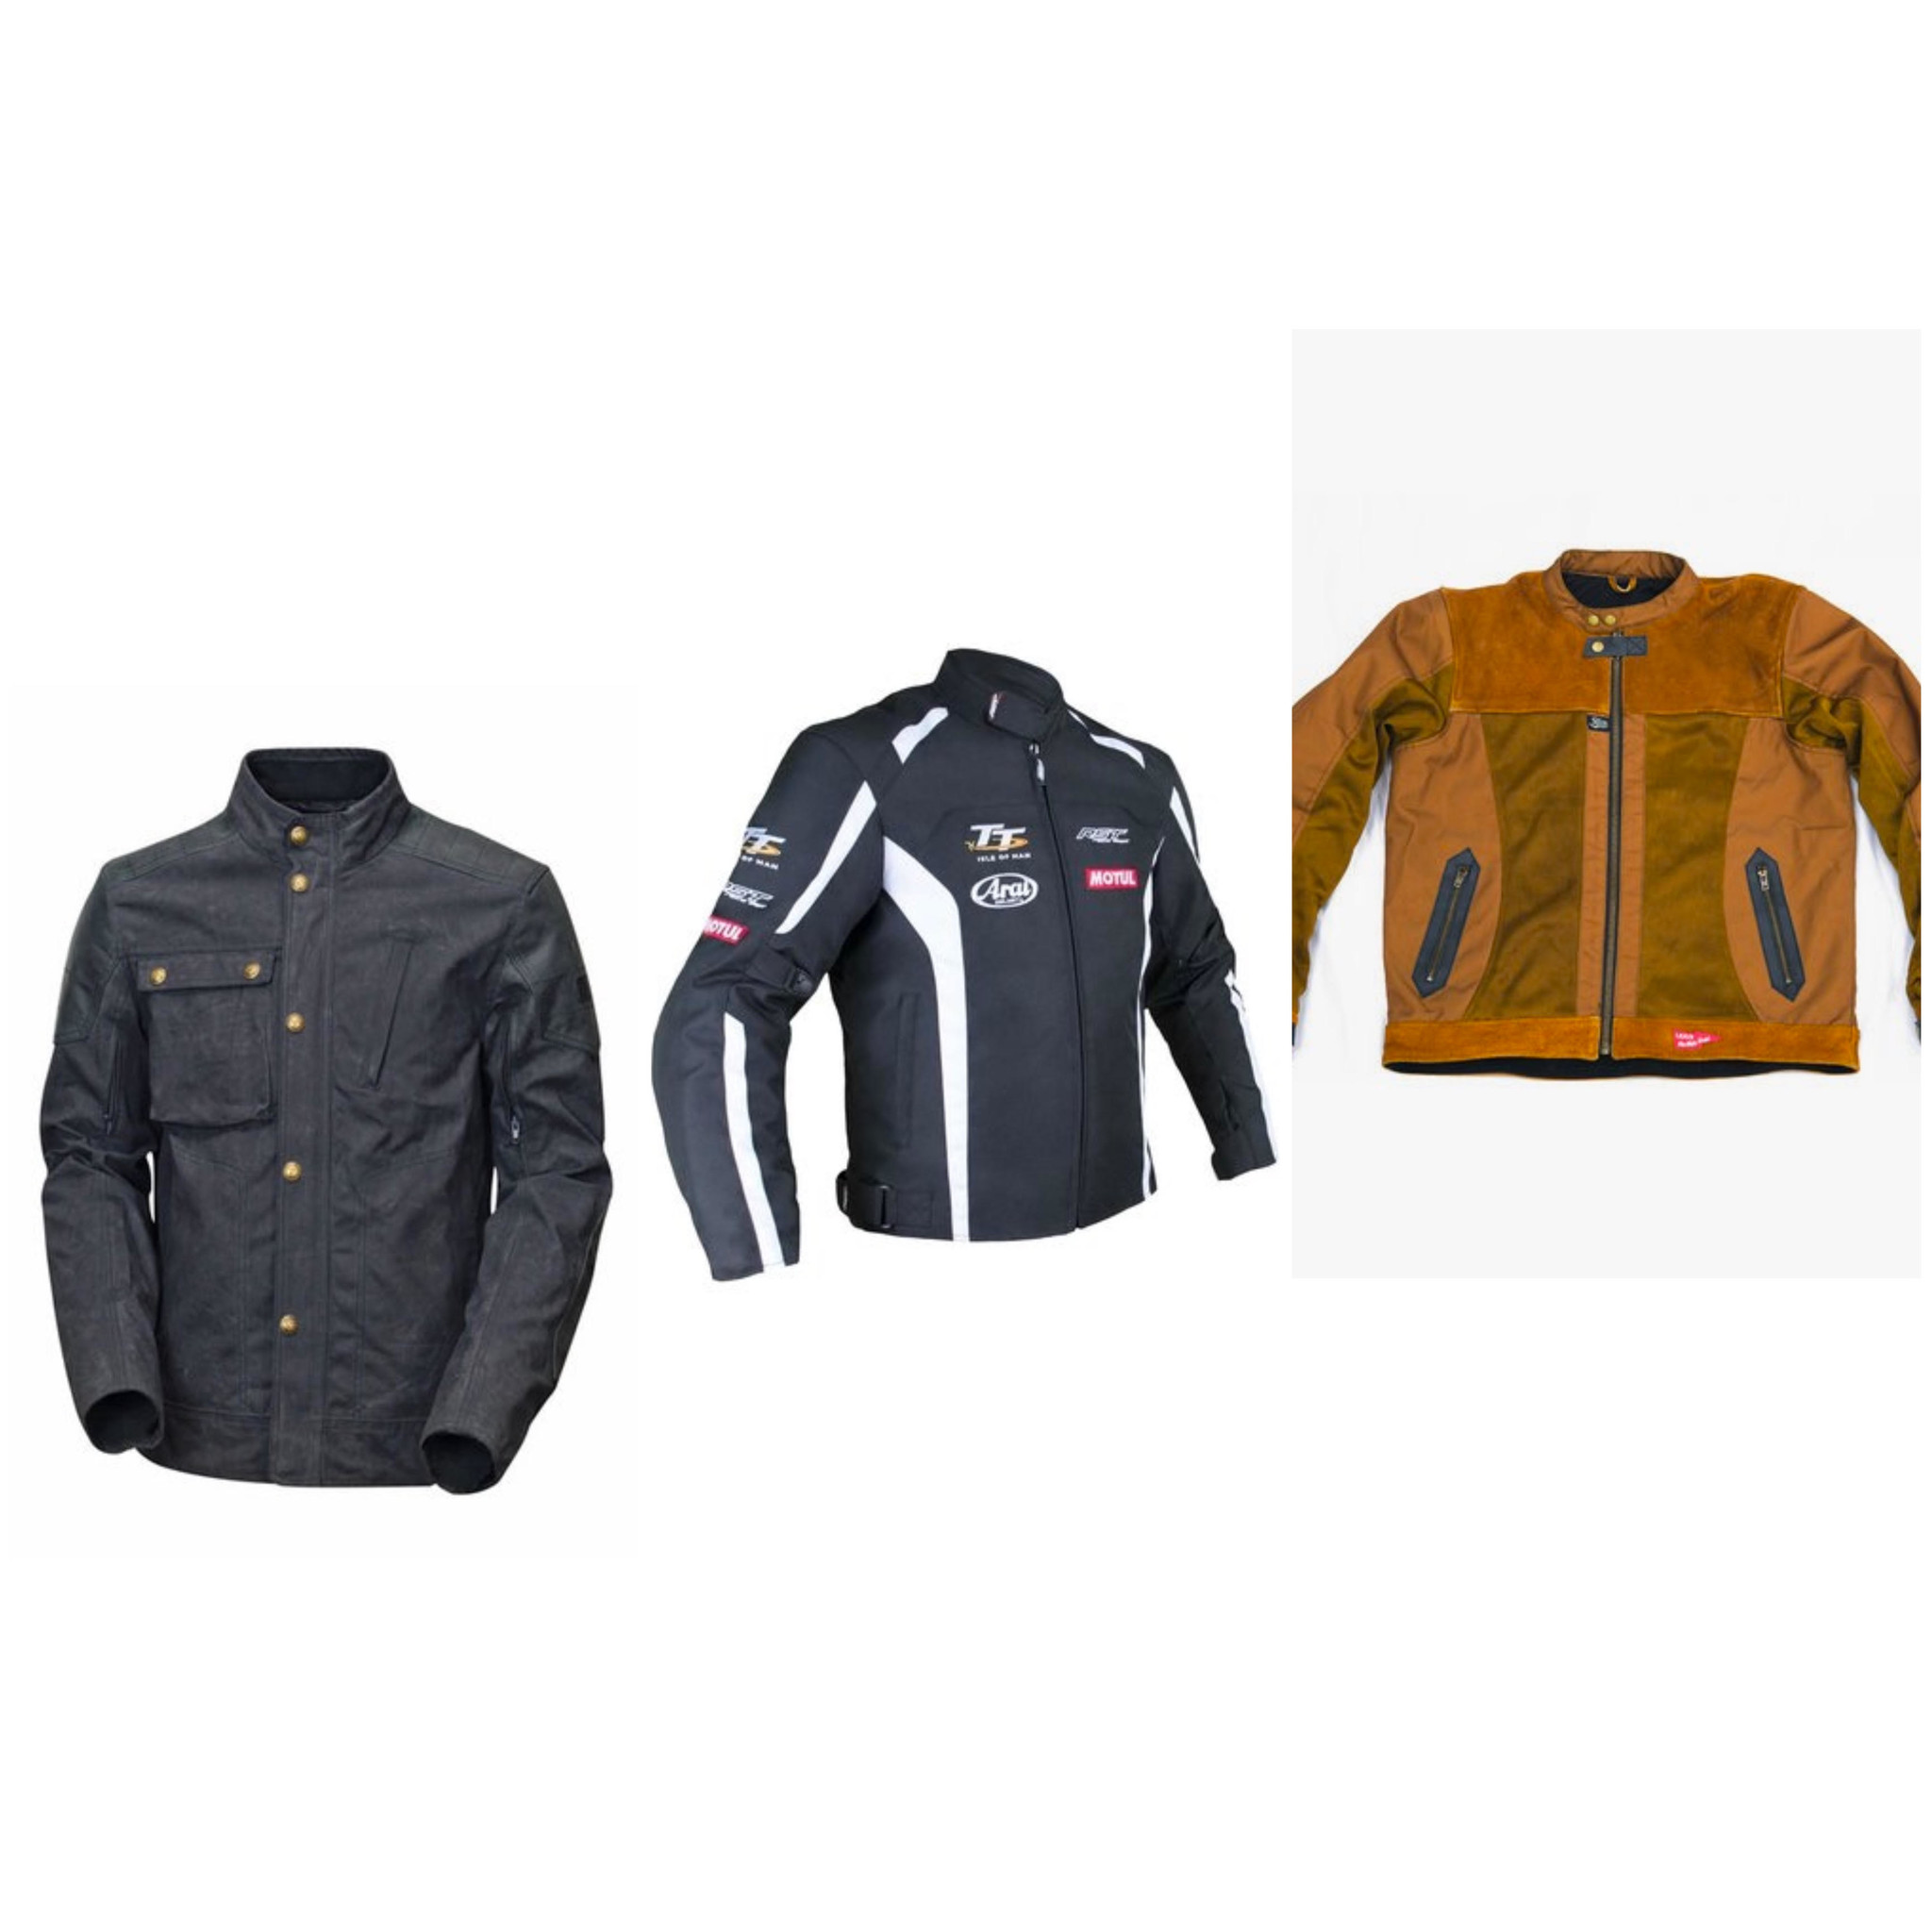 How to: Choose the Right Motorcycle Riding Jacket